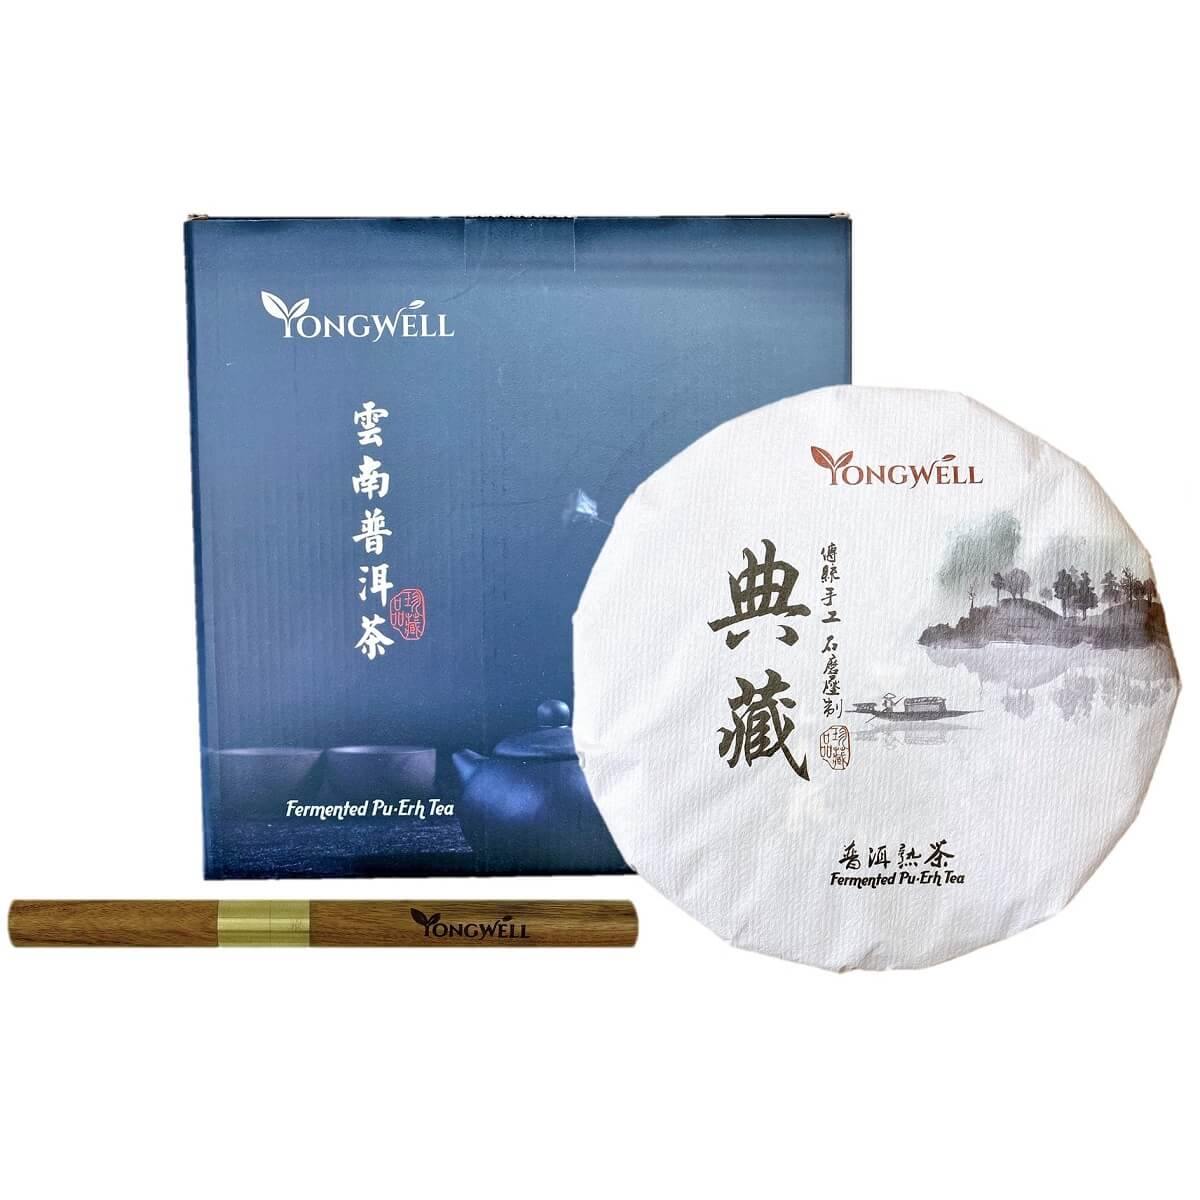 2013 Limited Edition Yunnan Fermented Pu Erh Compressed Tea Cake - 357g (12.3oz) + Free Tea Knife - Buy at New Green Nutrition